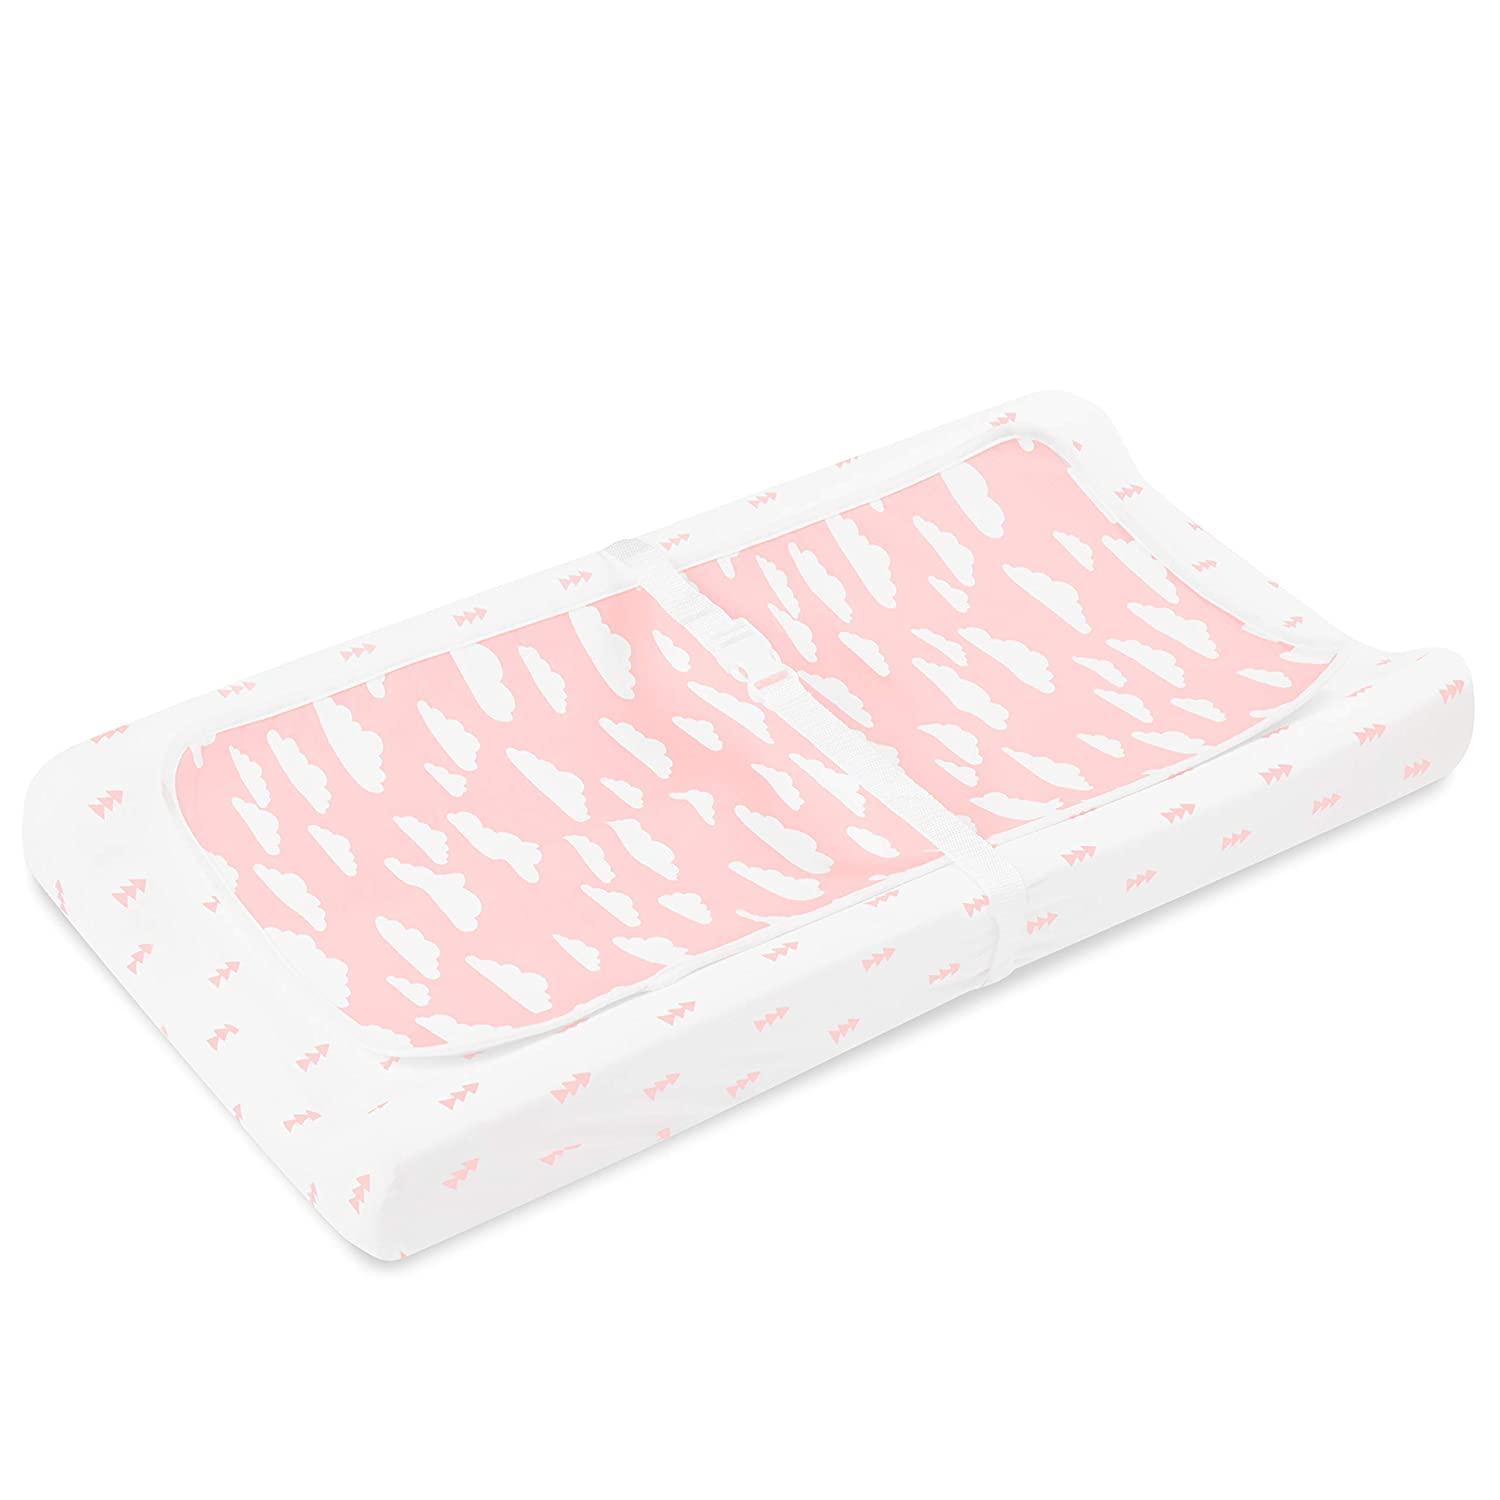 Pink Changing Table/dresser Top Pad Cover Minky Diaper 